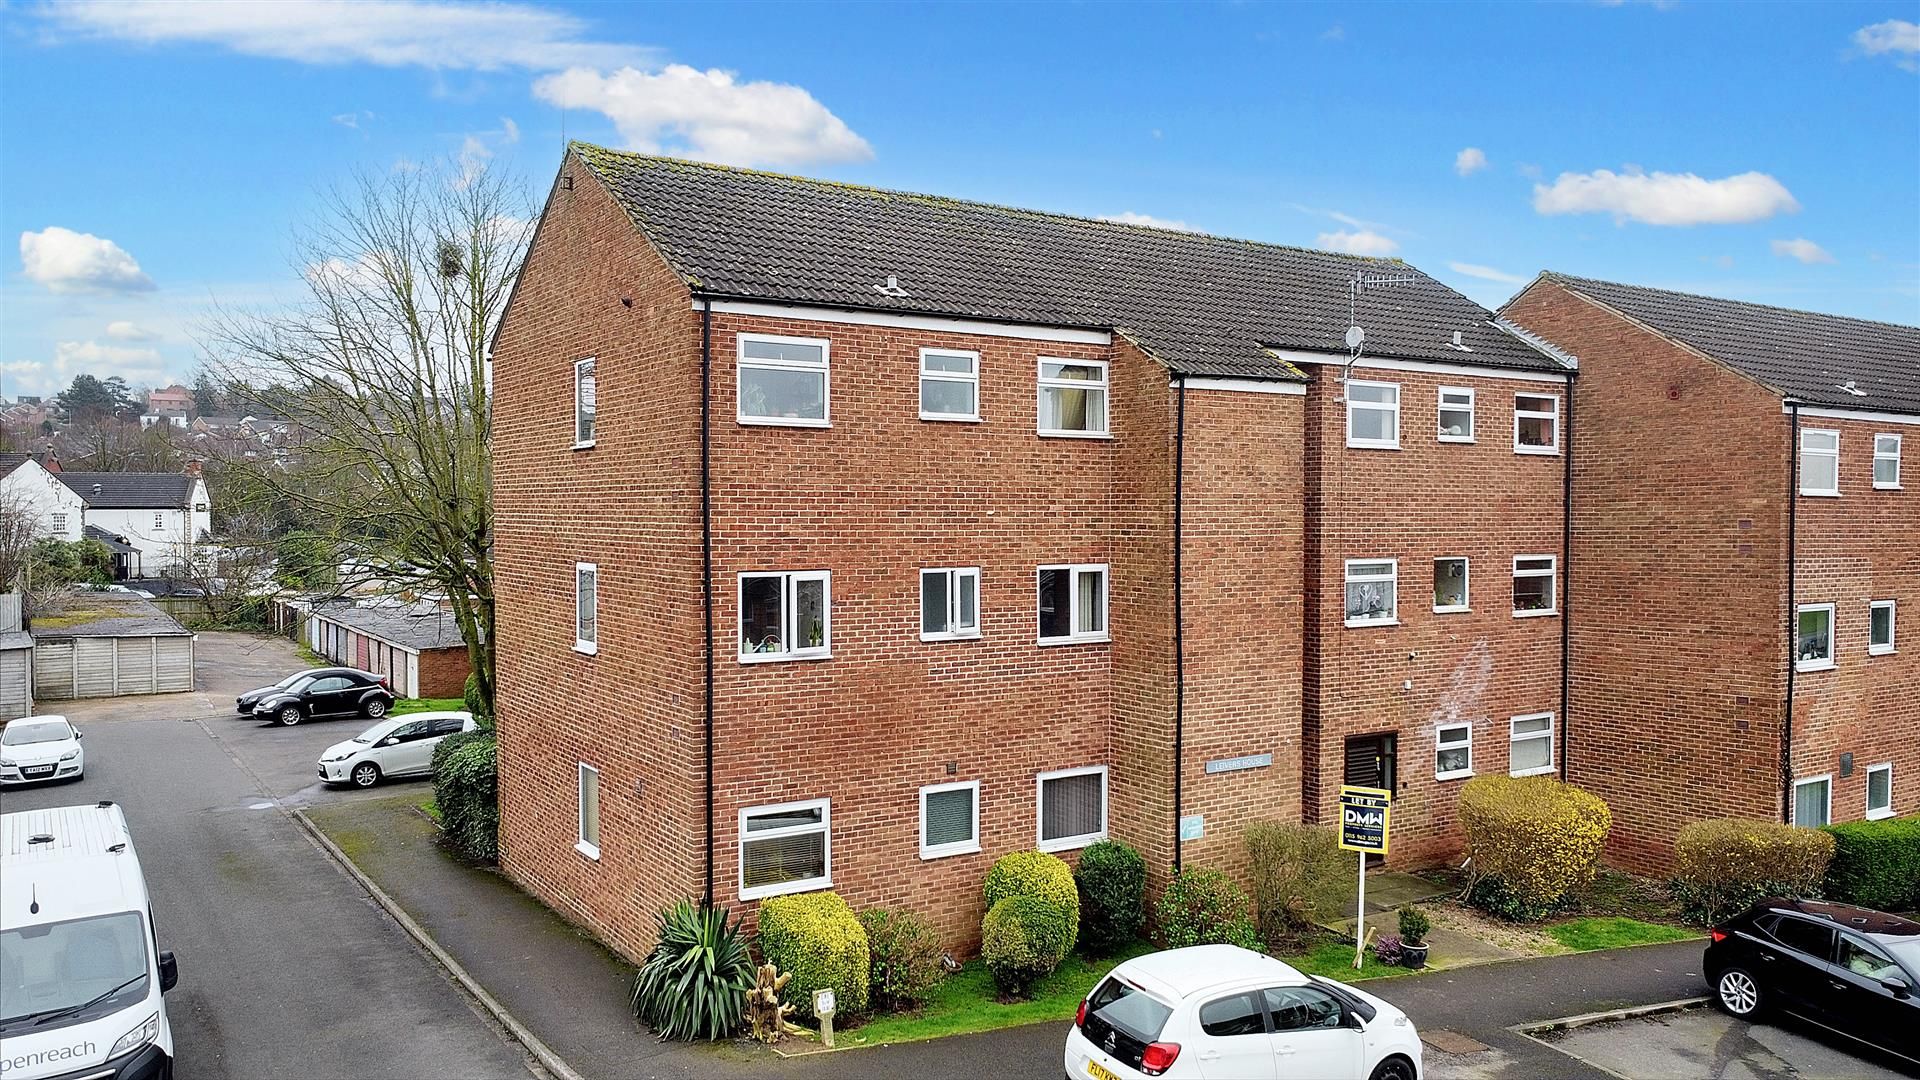 Leivers House, Derwent Crescent, Arnold, Nottingham, NG5 6TF